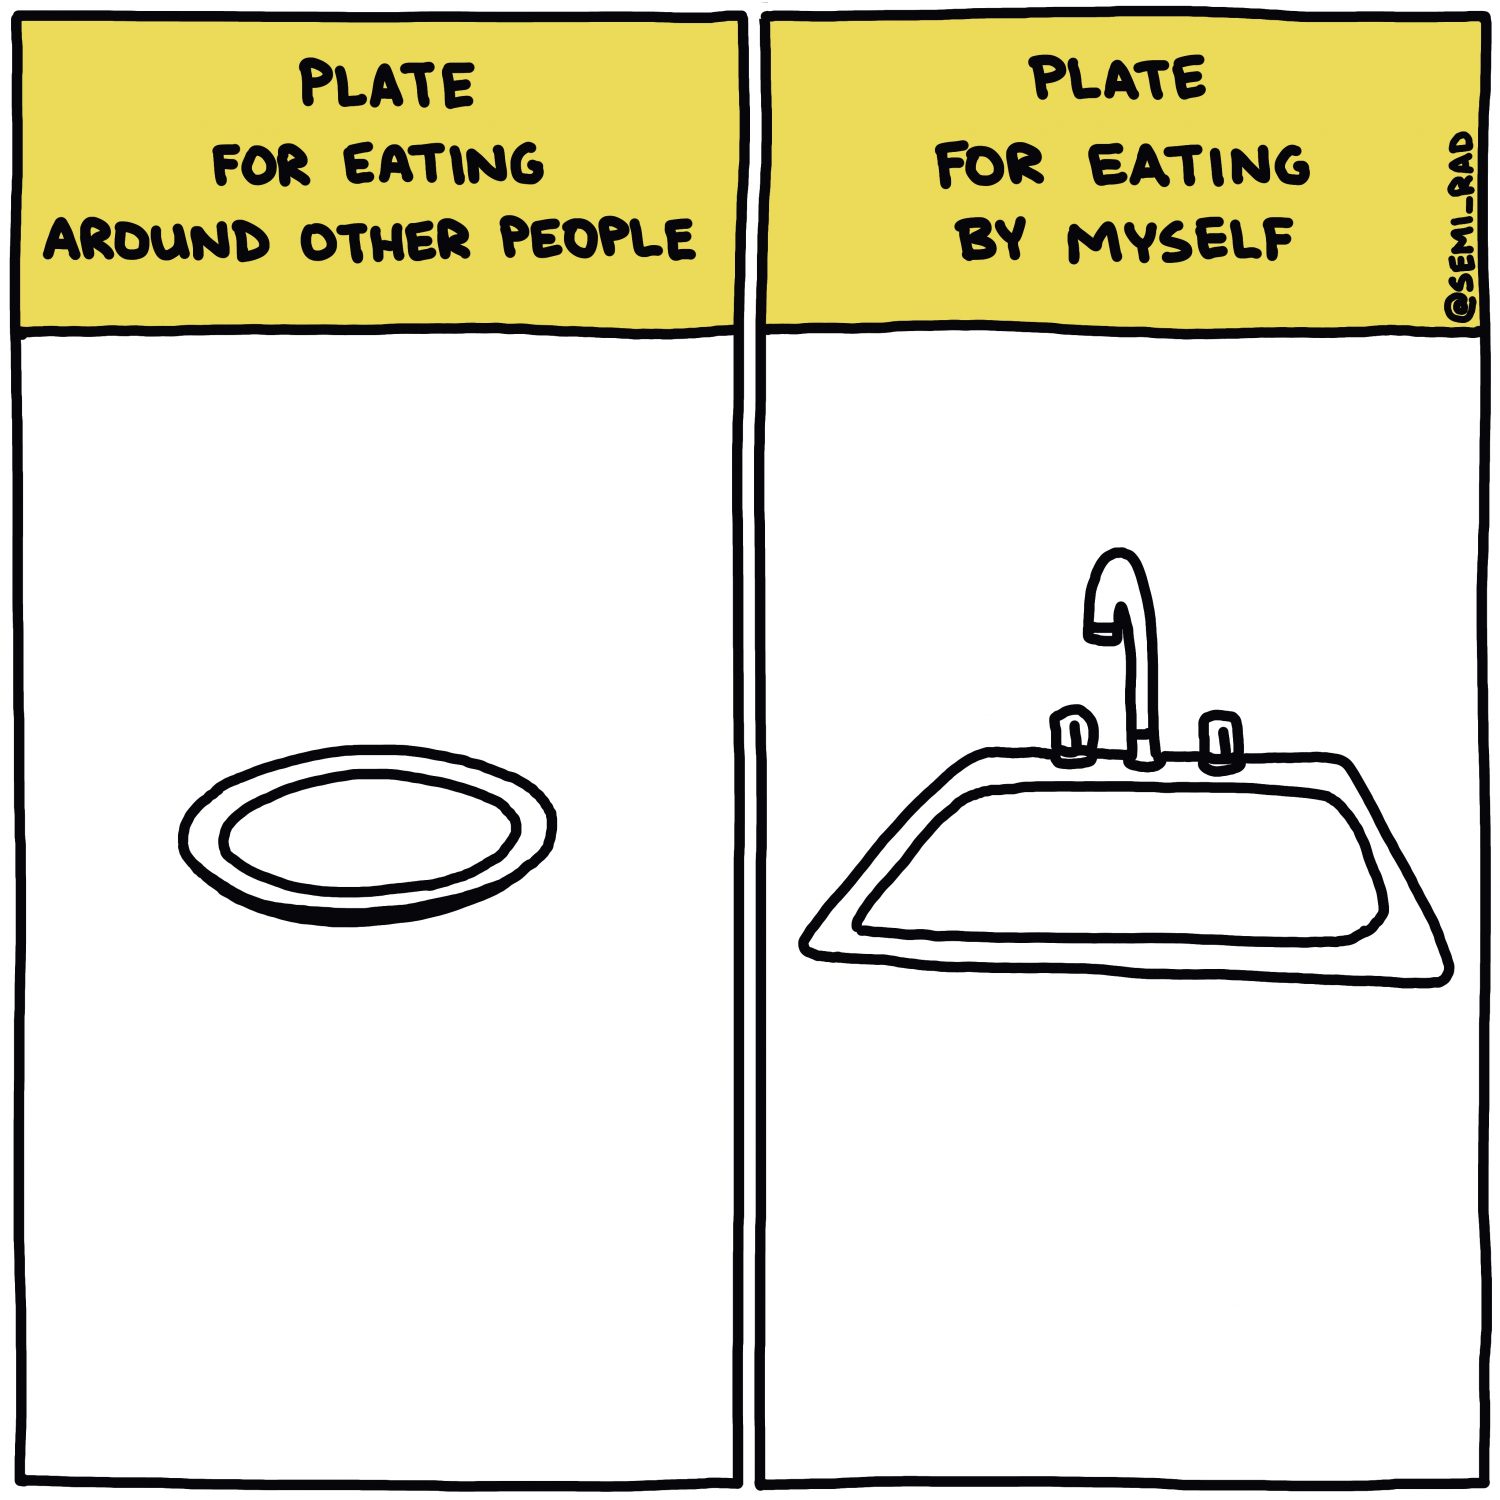 Semi-Rad Chart - Plate For Eating Around Other People Vs. Plate For Eating By Myself